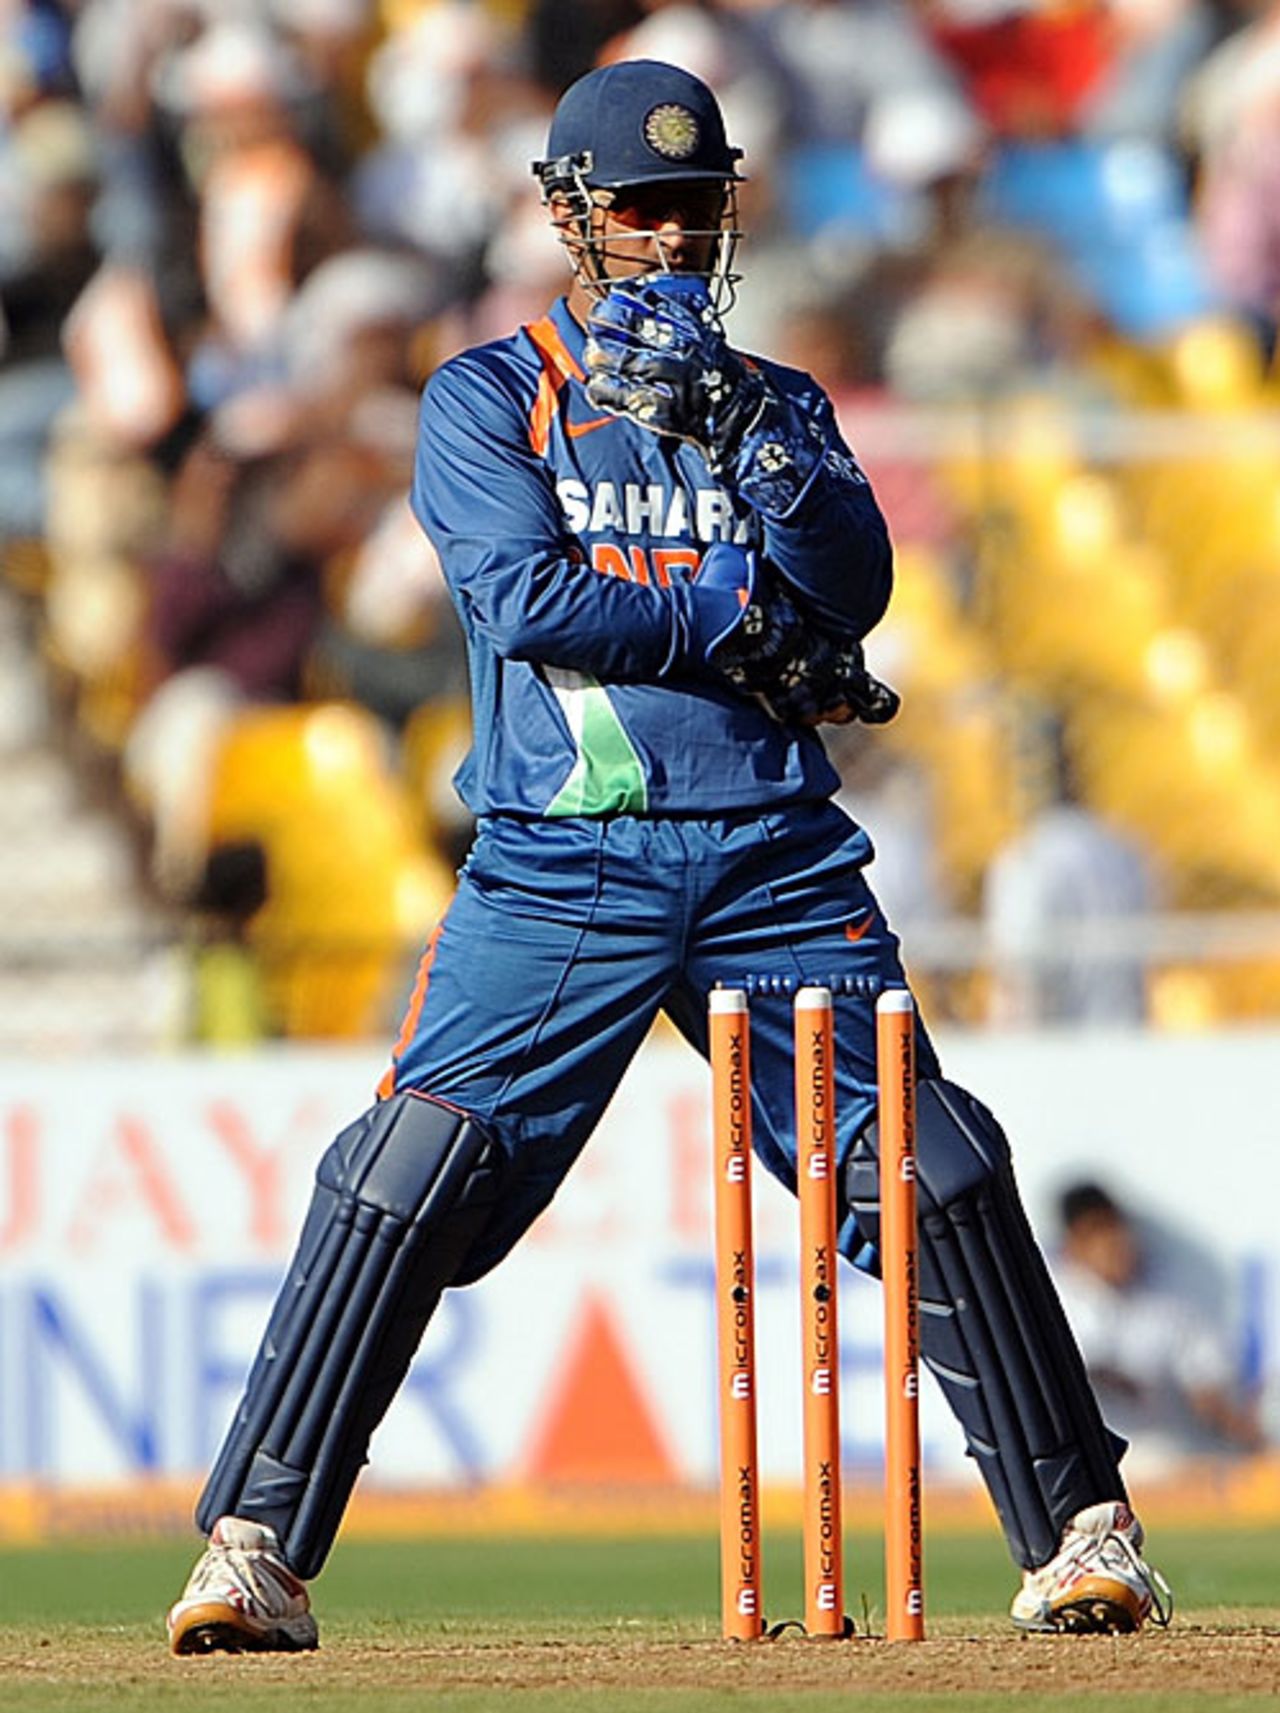 MS Dhoni ponders his next move, India v South Africa, 3rd ODI, Ahmedabad, February 27, 2010